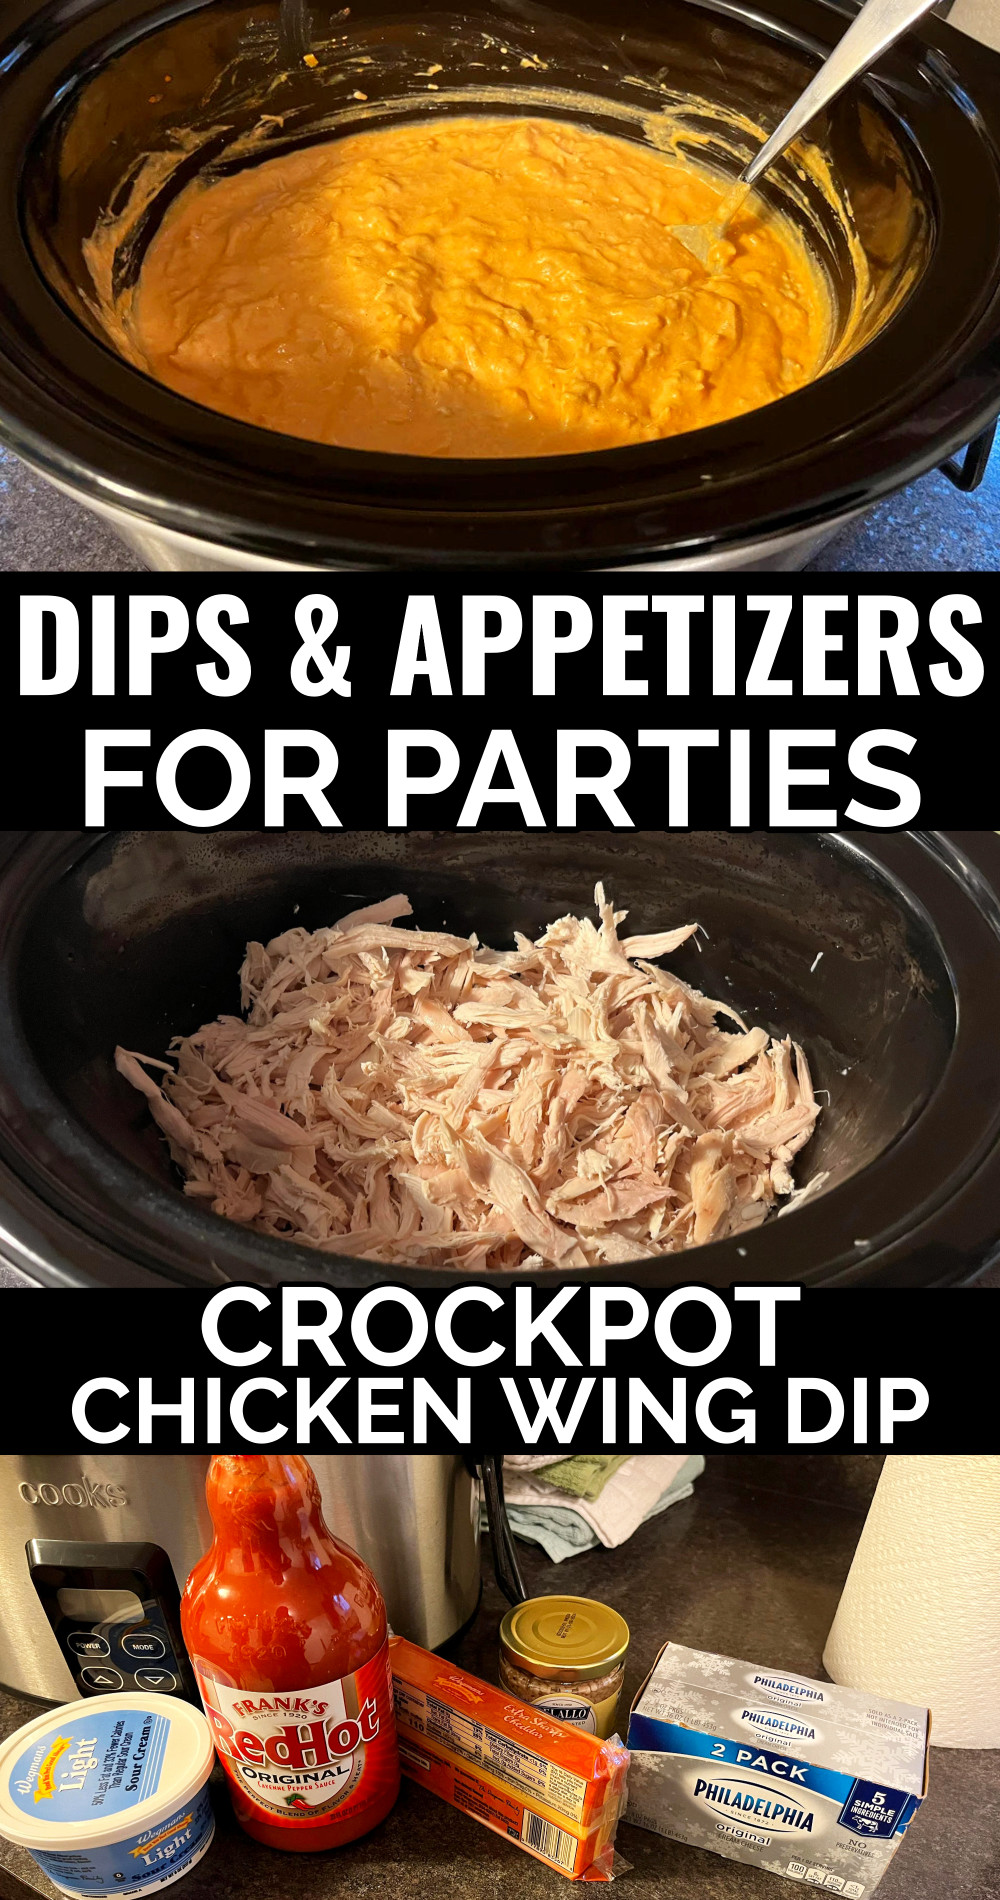 Dips and appetizers for parties crockpot chicken wing dip